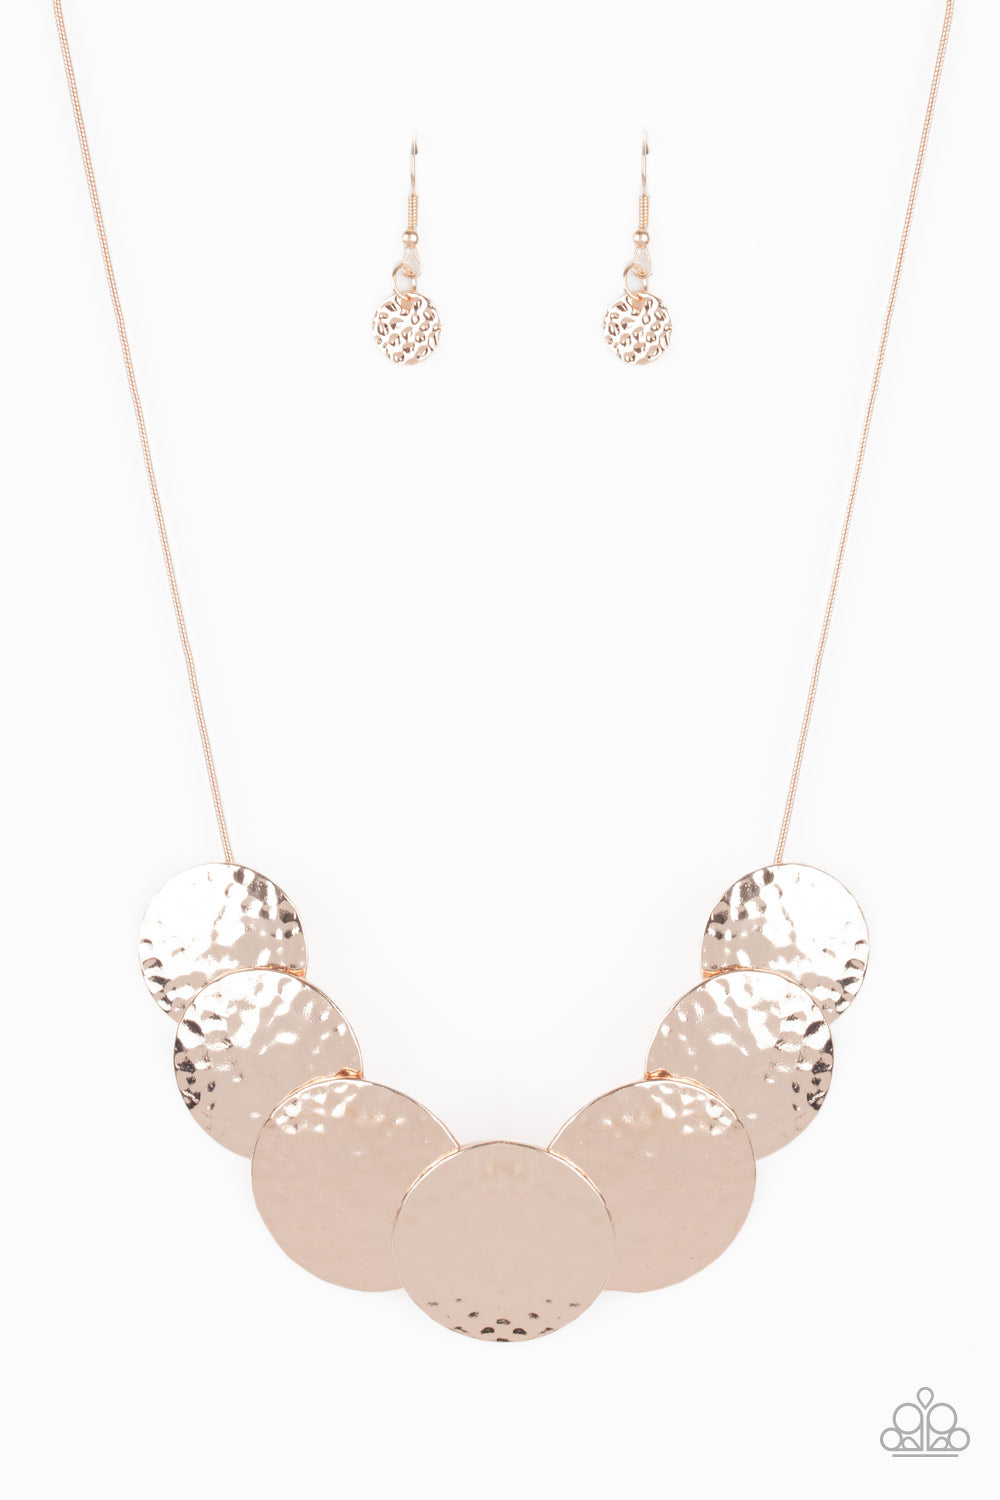 Paparazzi - RADIAL Waves - Rose Gold Necklace - Paparazzi Accessories